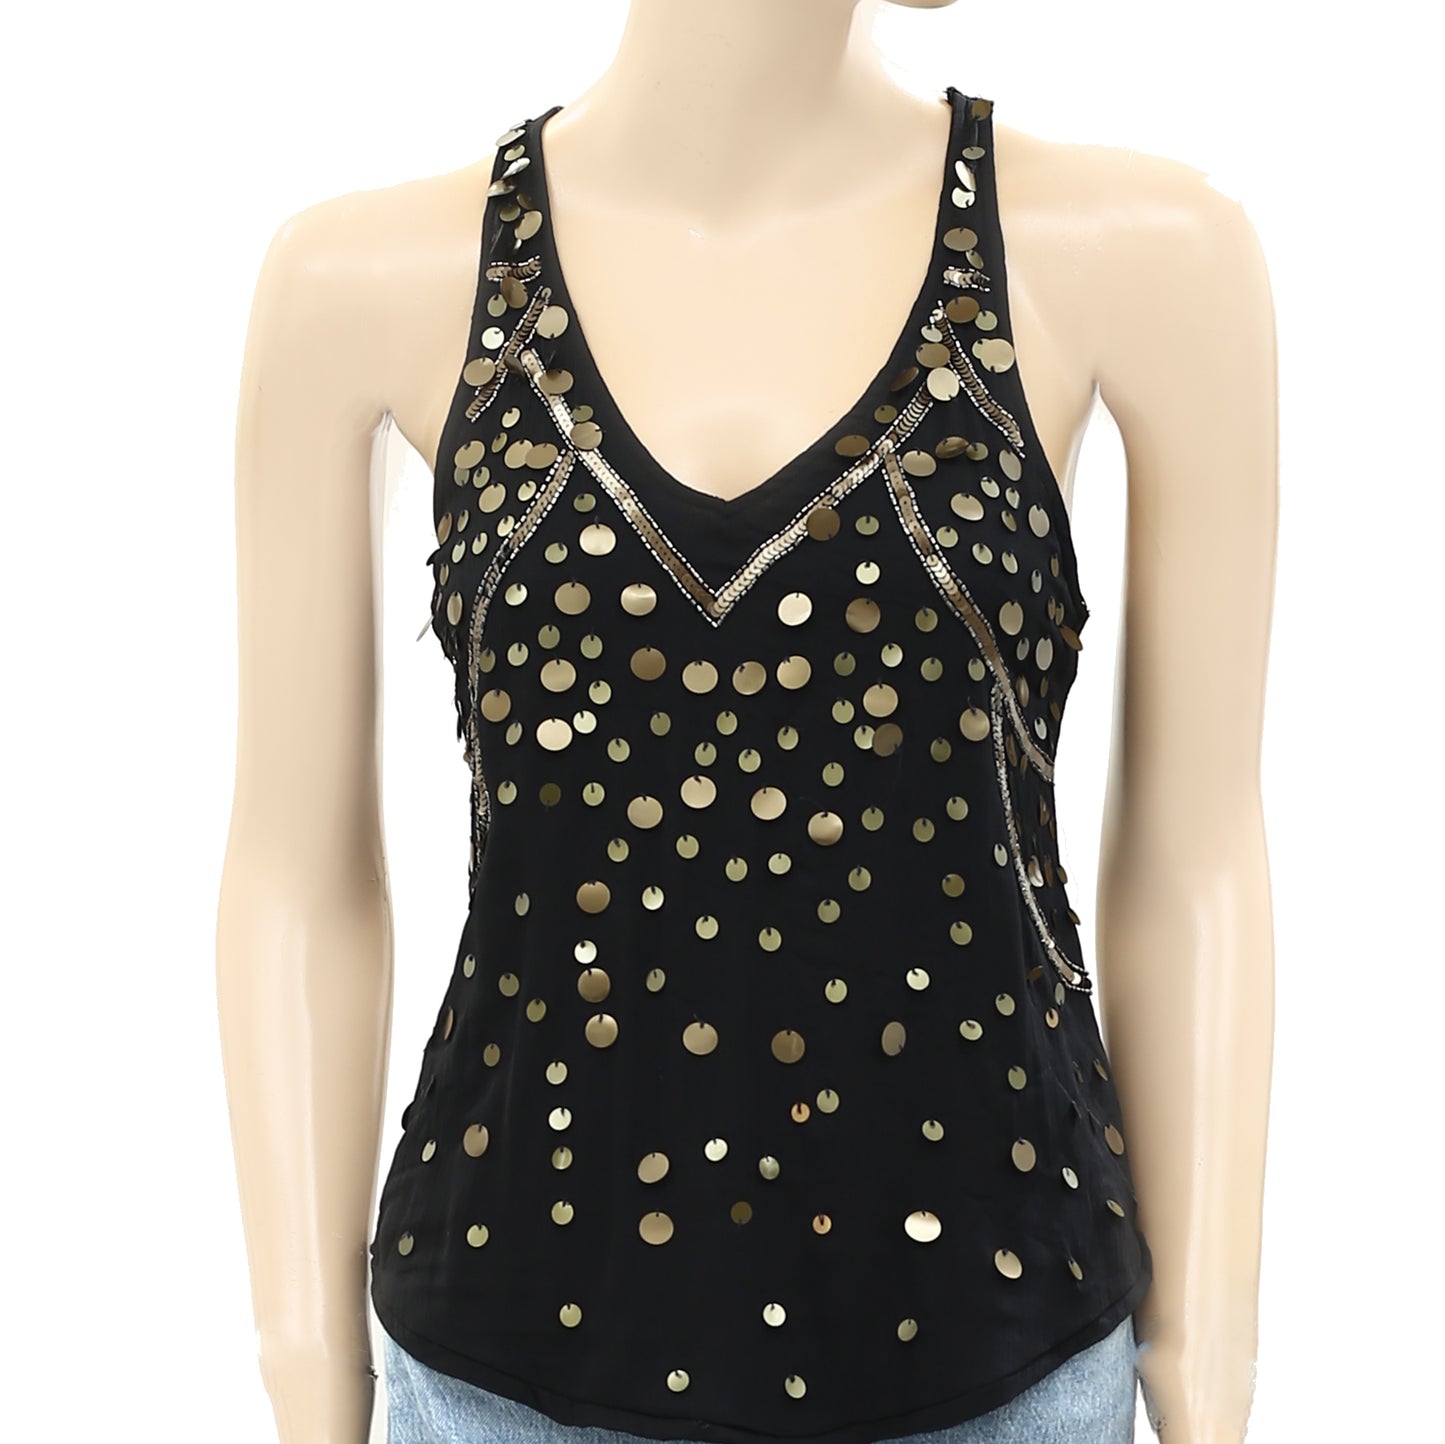 Ecote Urban Outfitters Sequin Embellished Tank Blouse Top XS